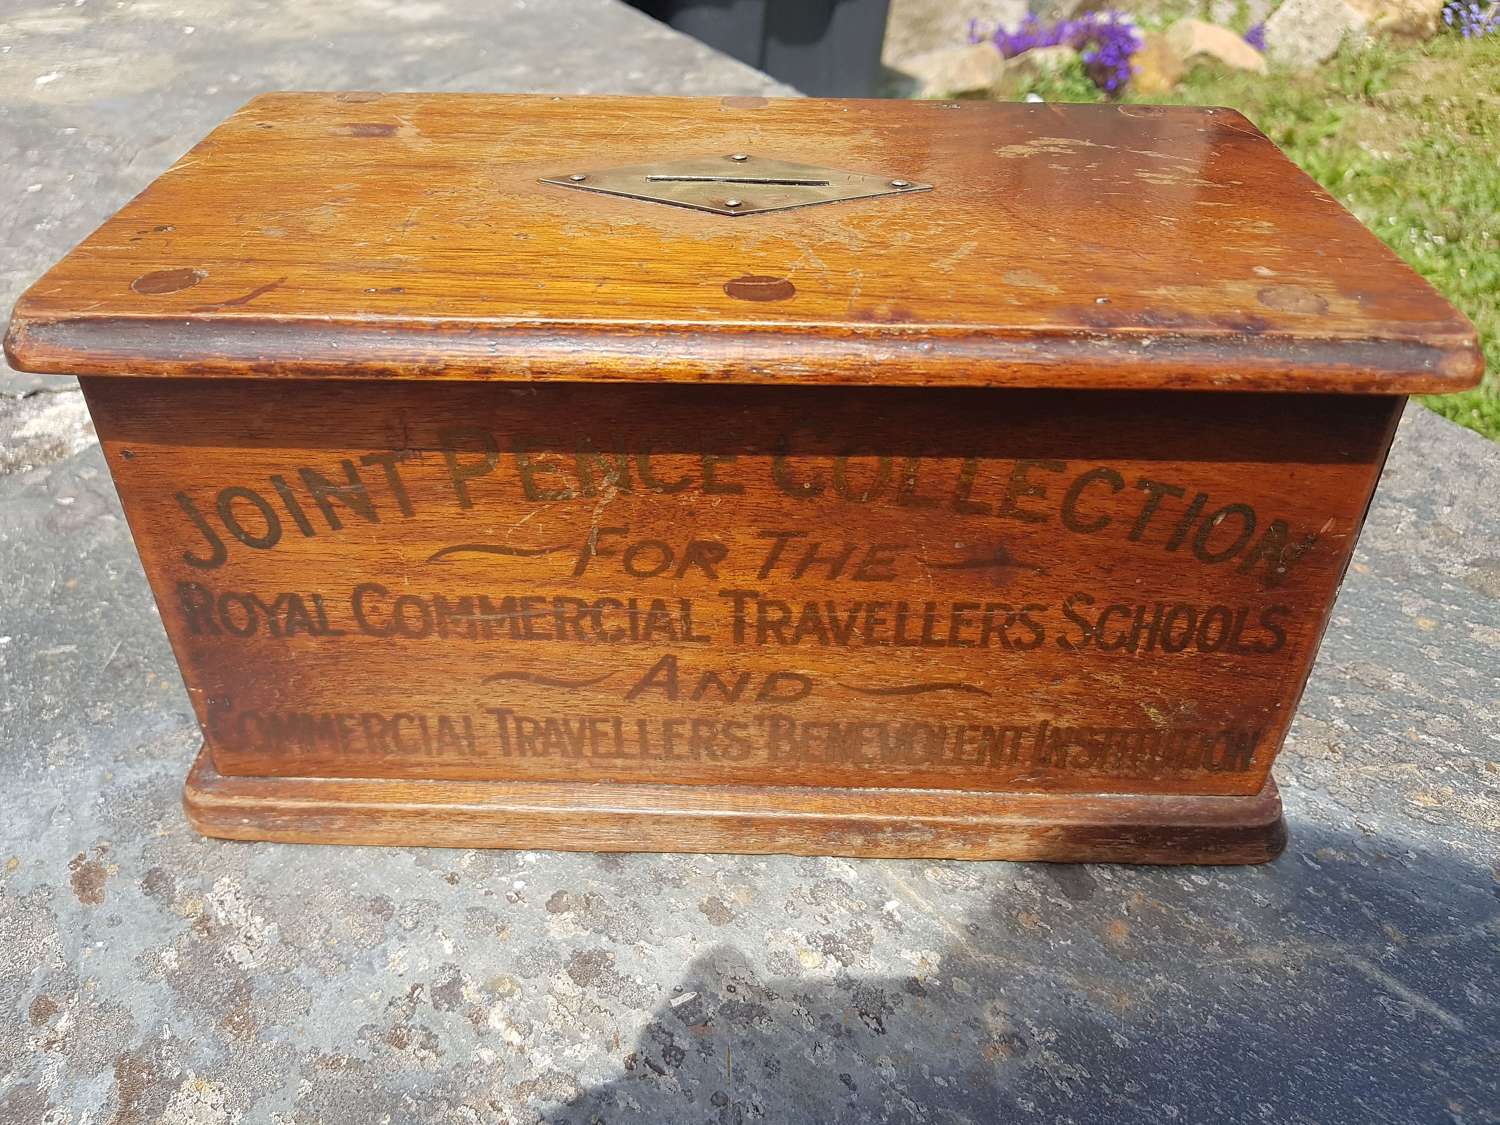 Vintage charity collection box